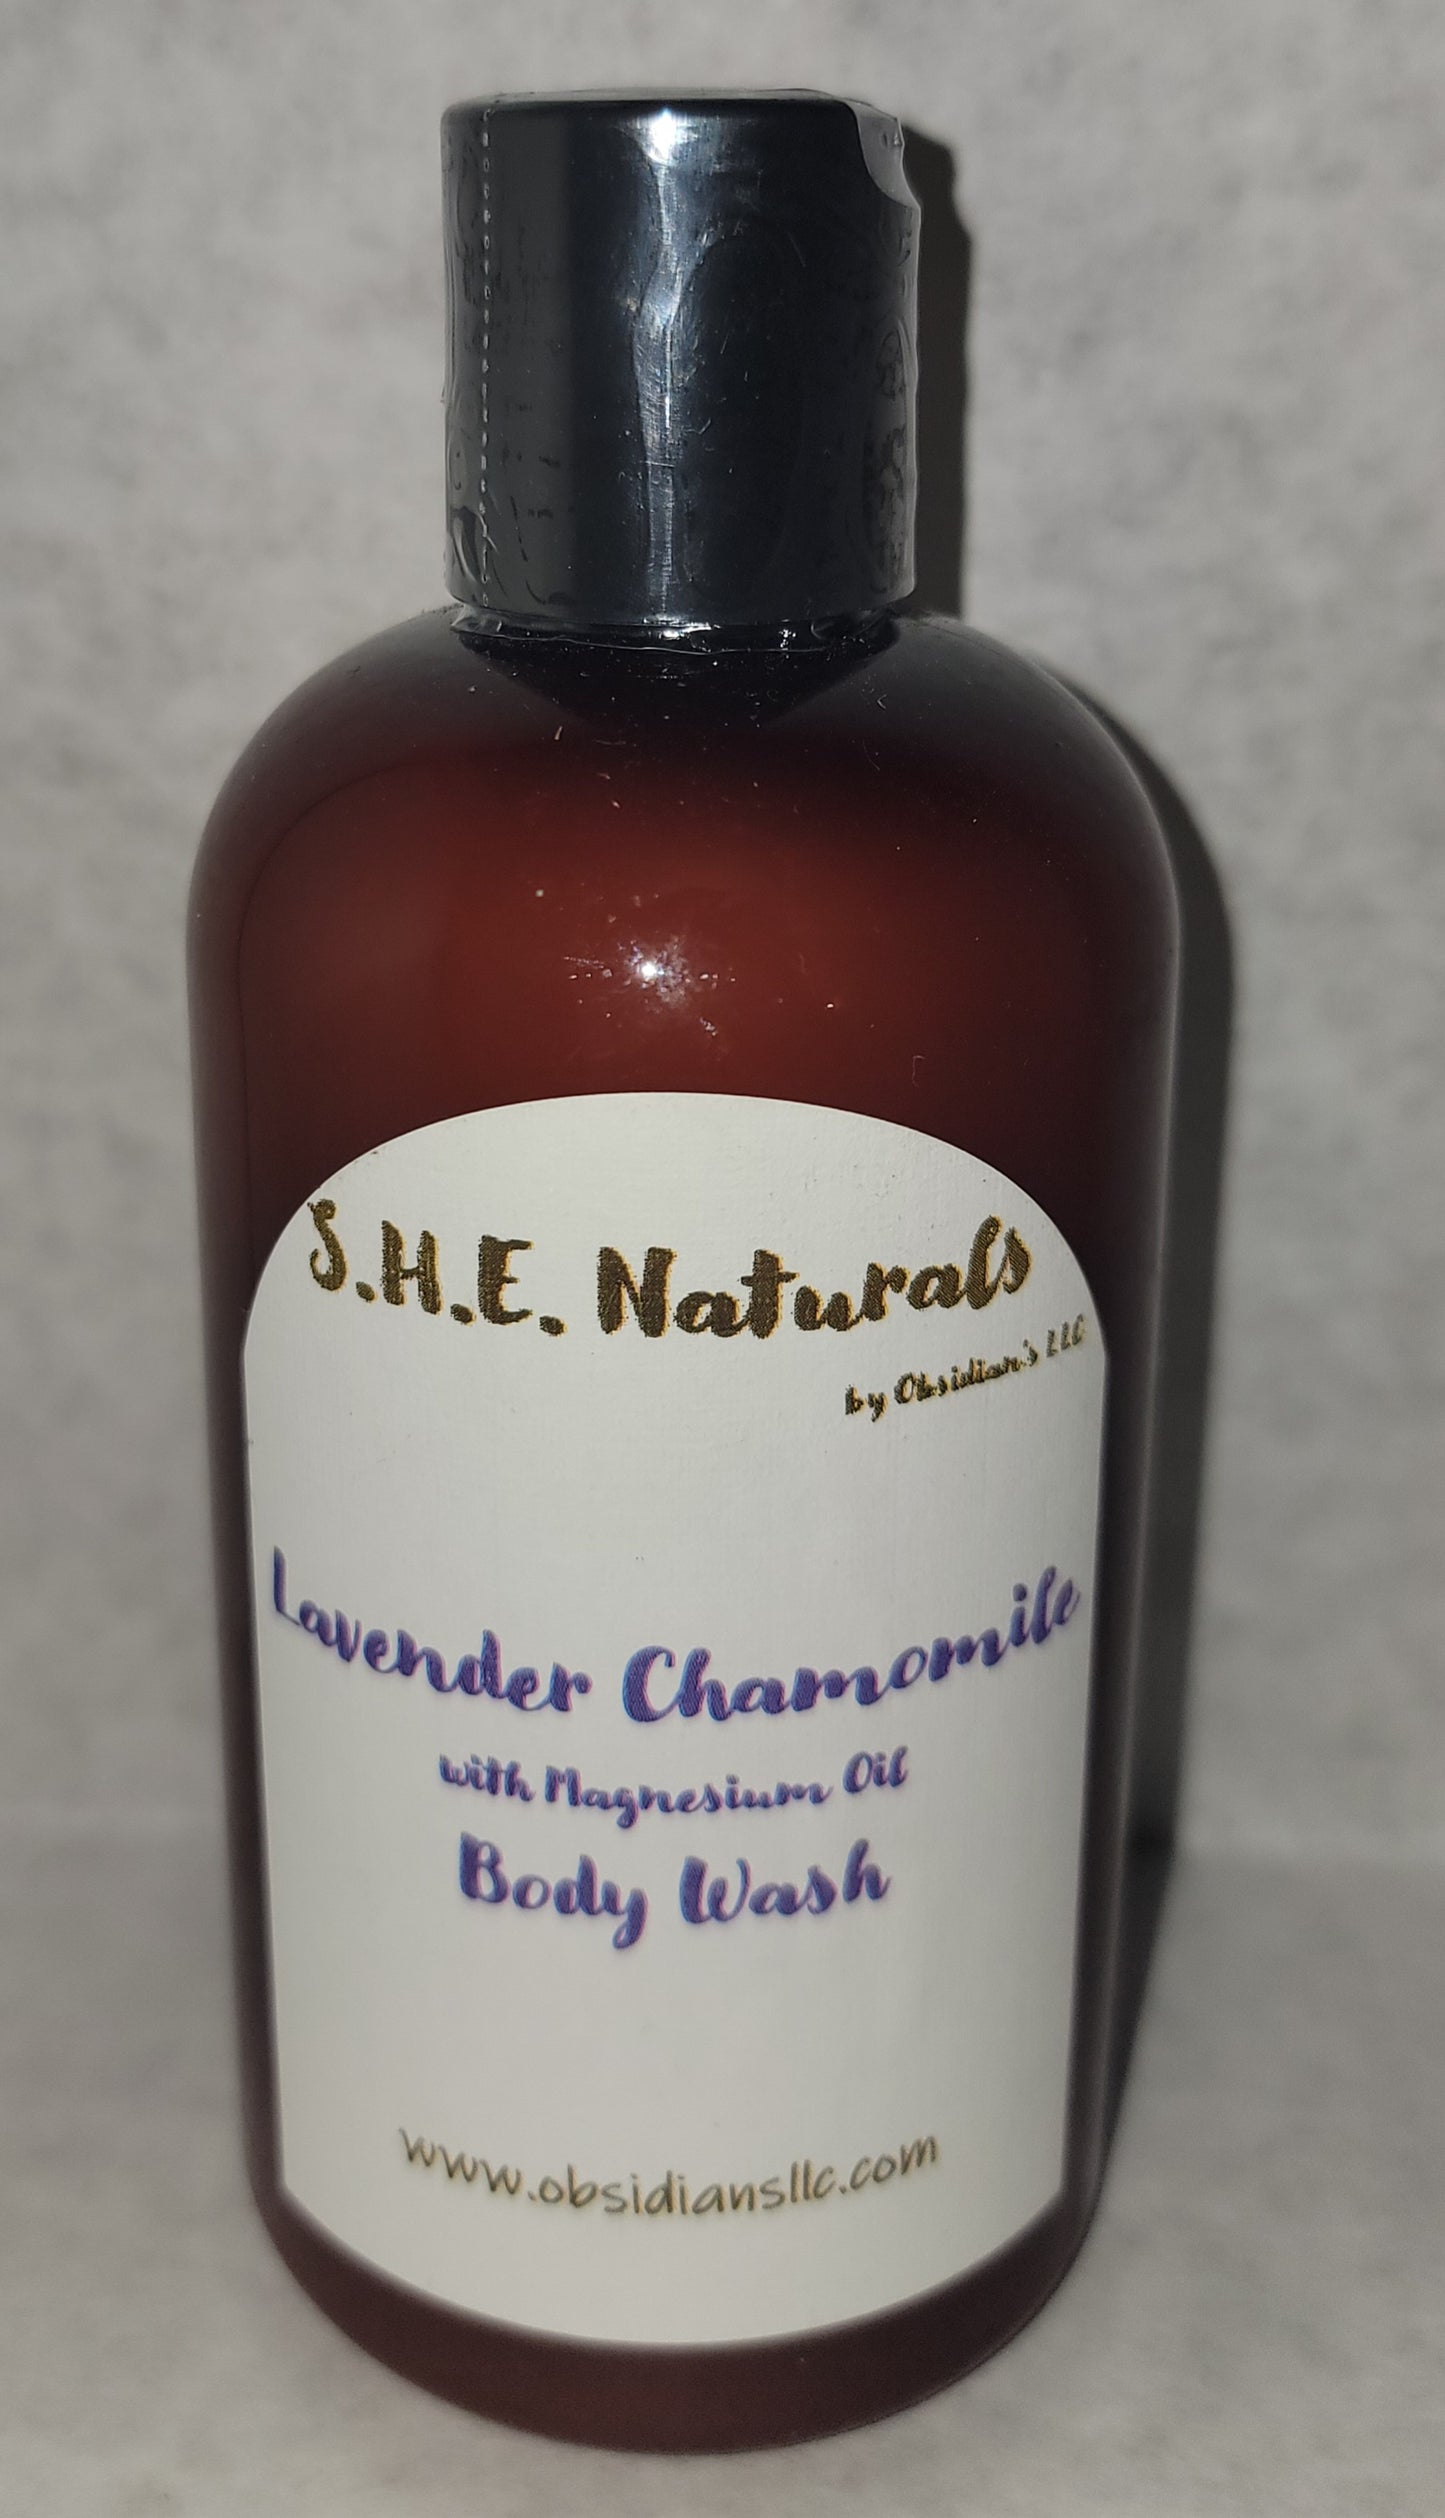 Lavender Chamomile with Magnesium Oil Body Wash